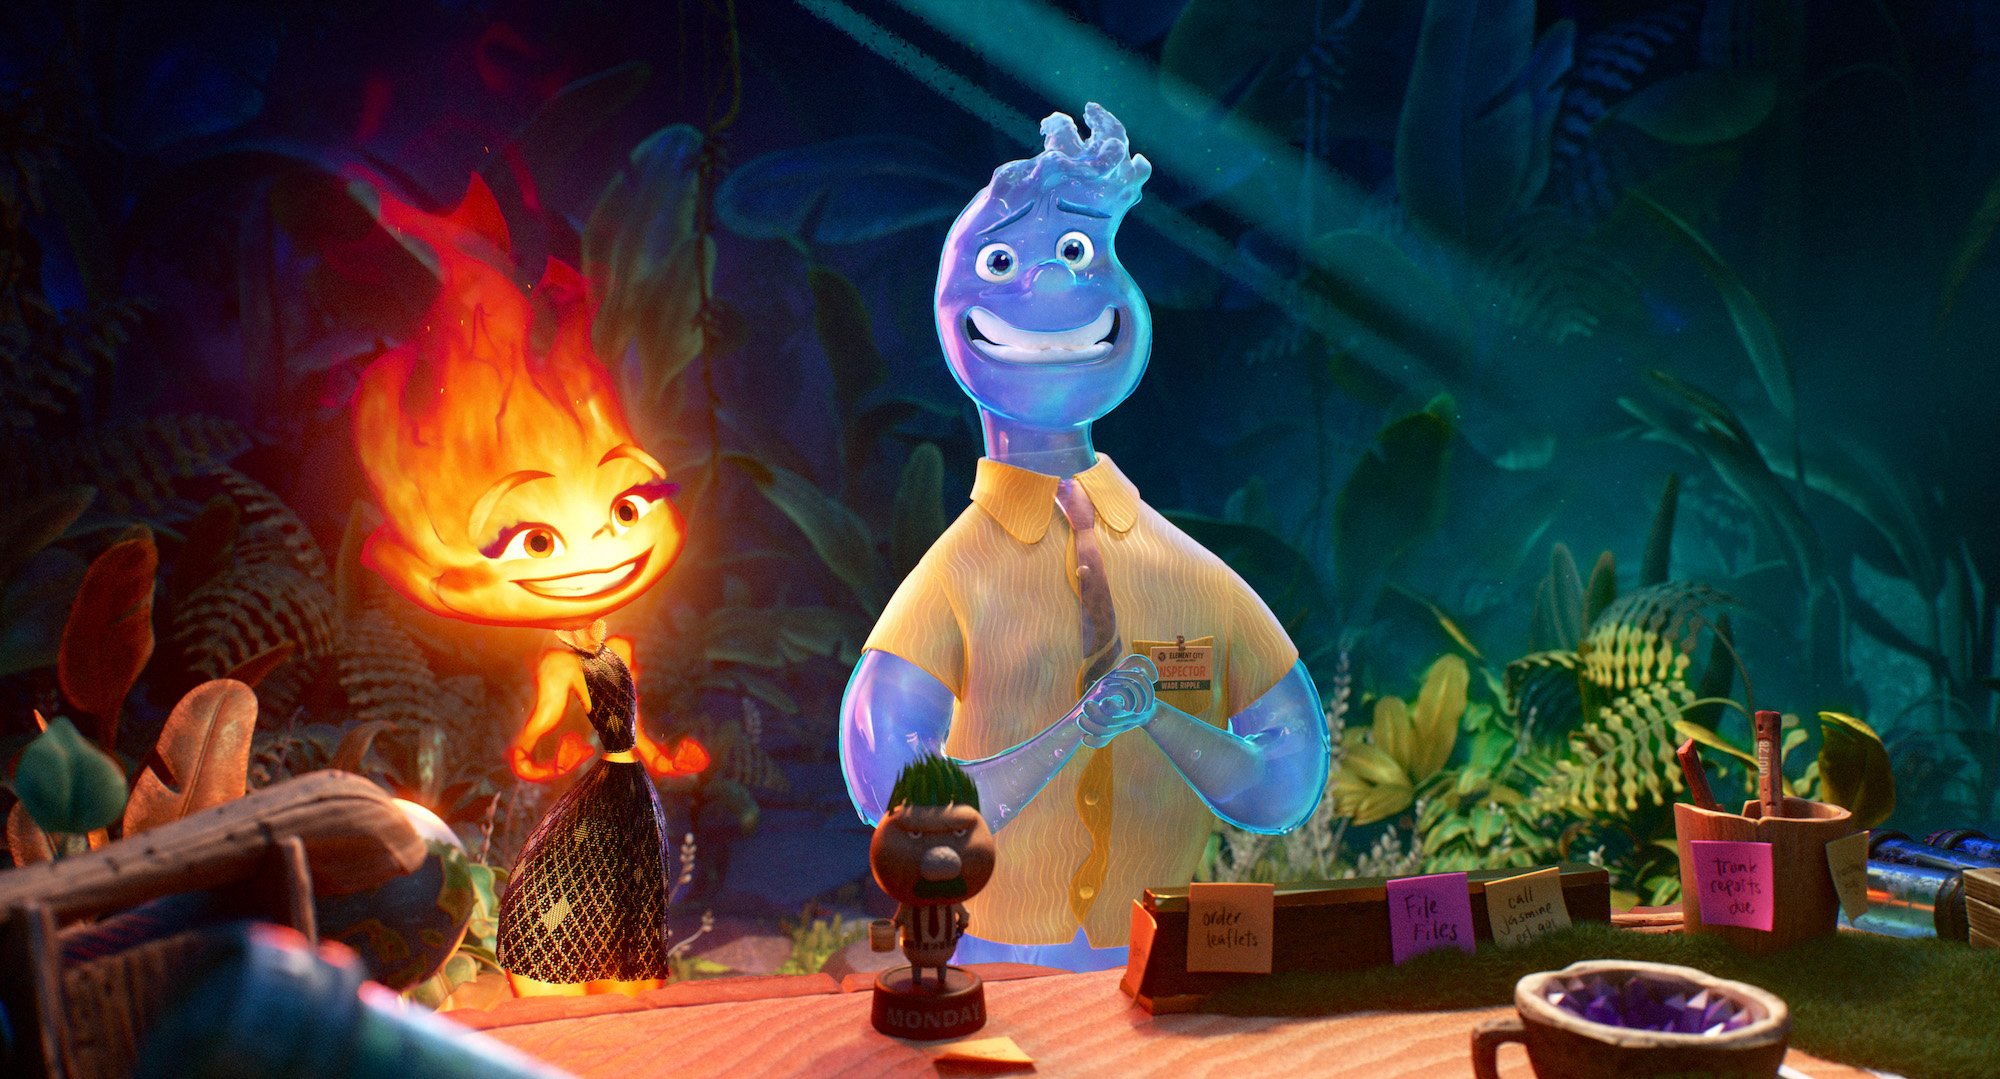 New Image and Details For Pixar's Fun New Film ELEMENTAL